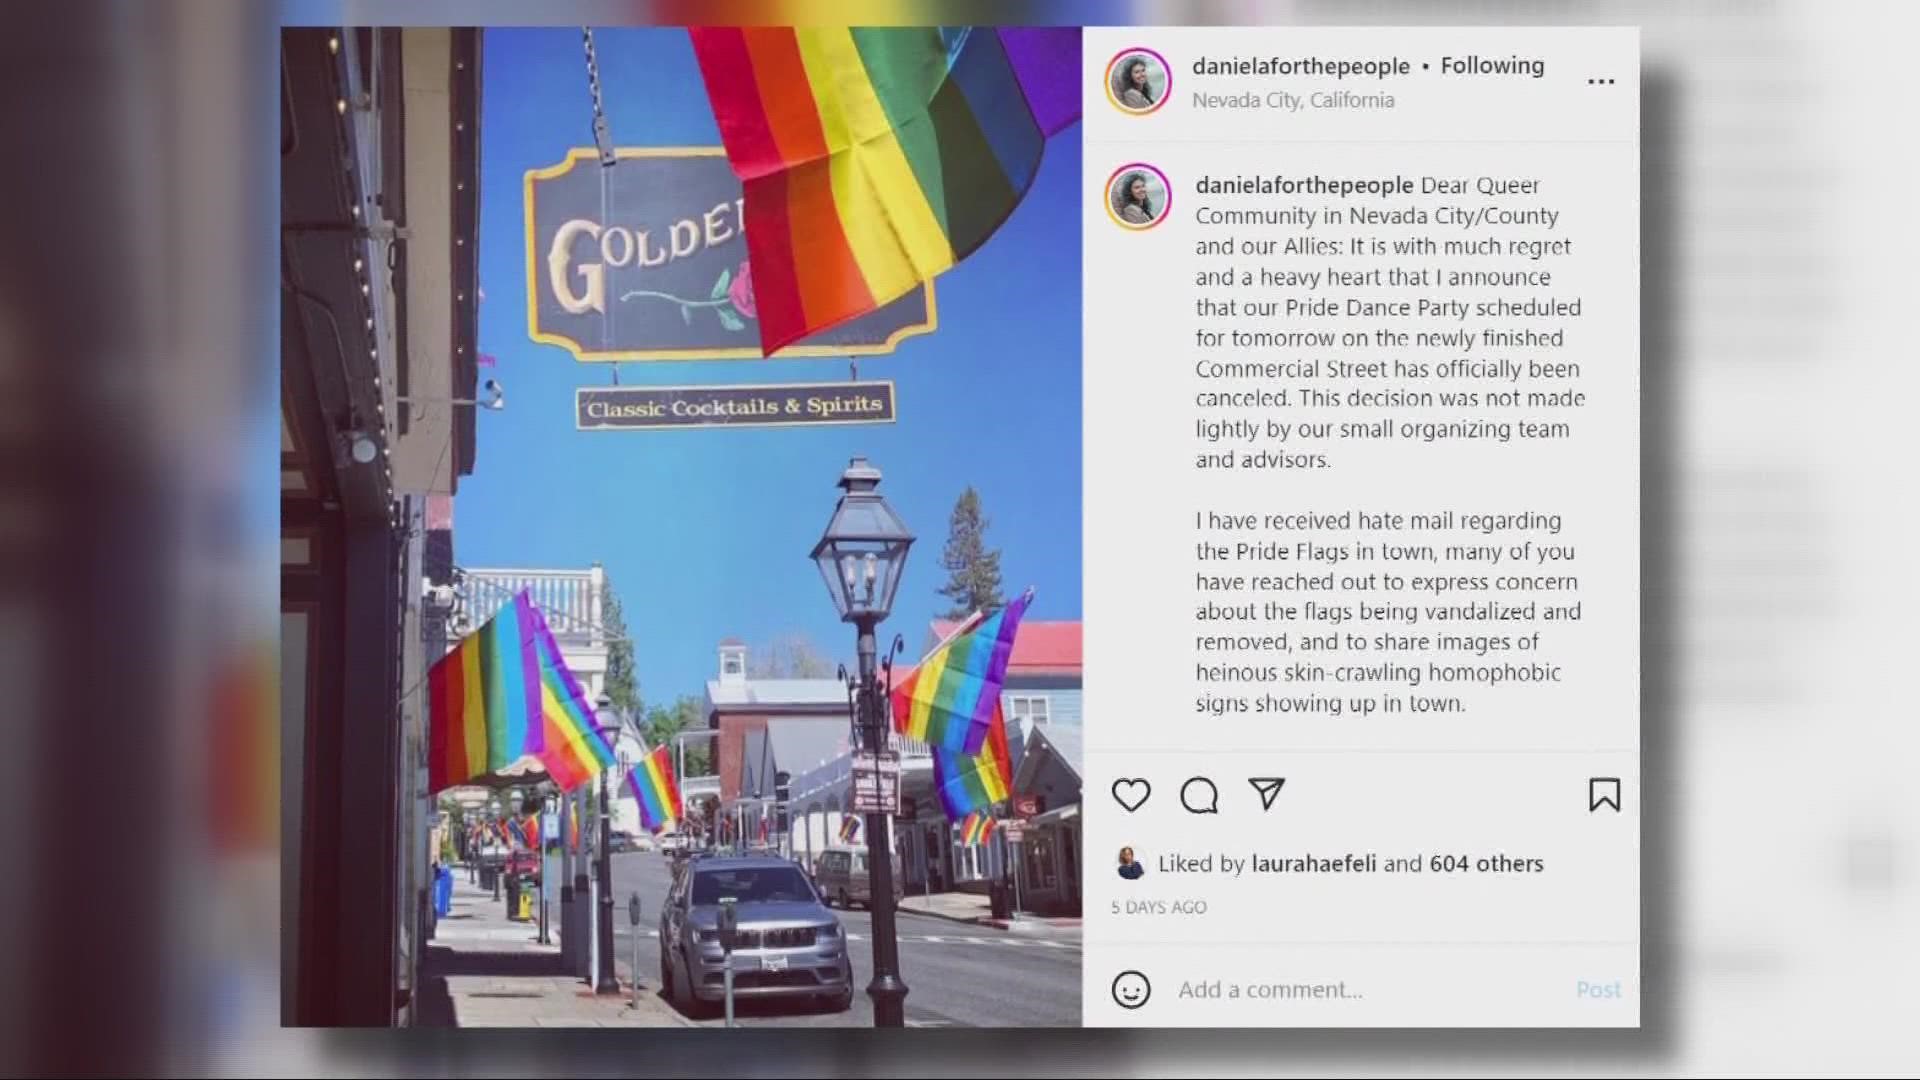 Nevada City's Pride Dance Party was canceled after safety concerns, according to City Councilmember Daniela Fernández.